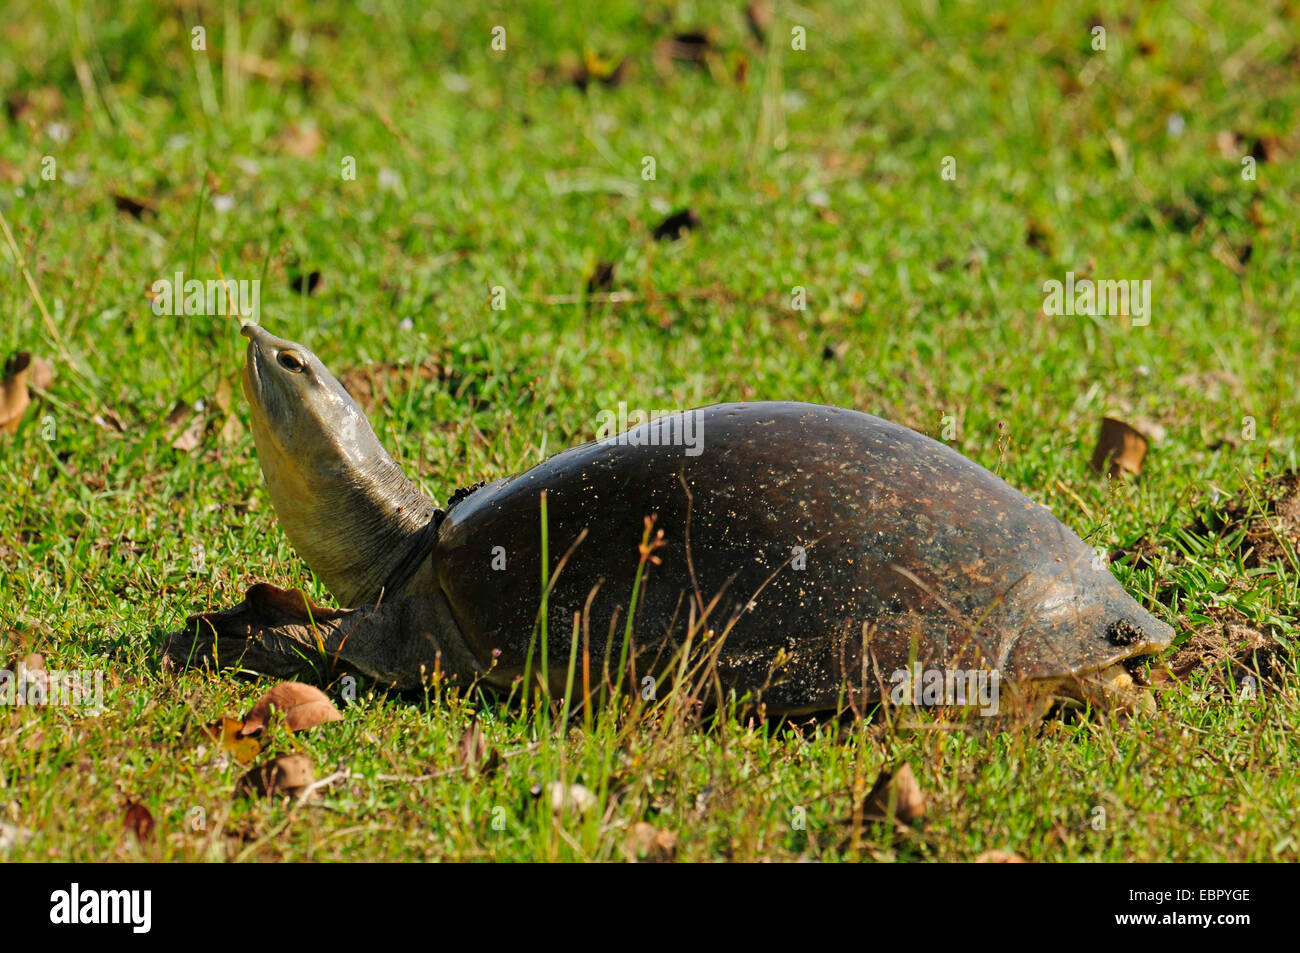 Indo-Gangetic flapshell, Indian flapshell turtle (Lissemys punctata), in a meadow, Sri Lanka, Wilpattu National Park Stock Photo